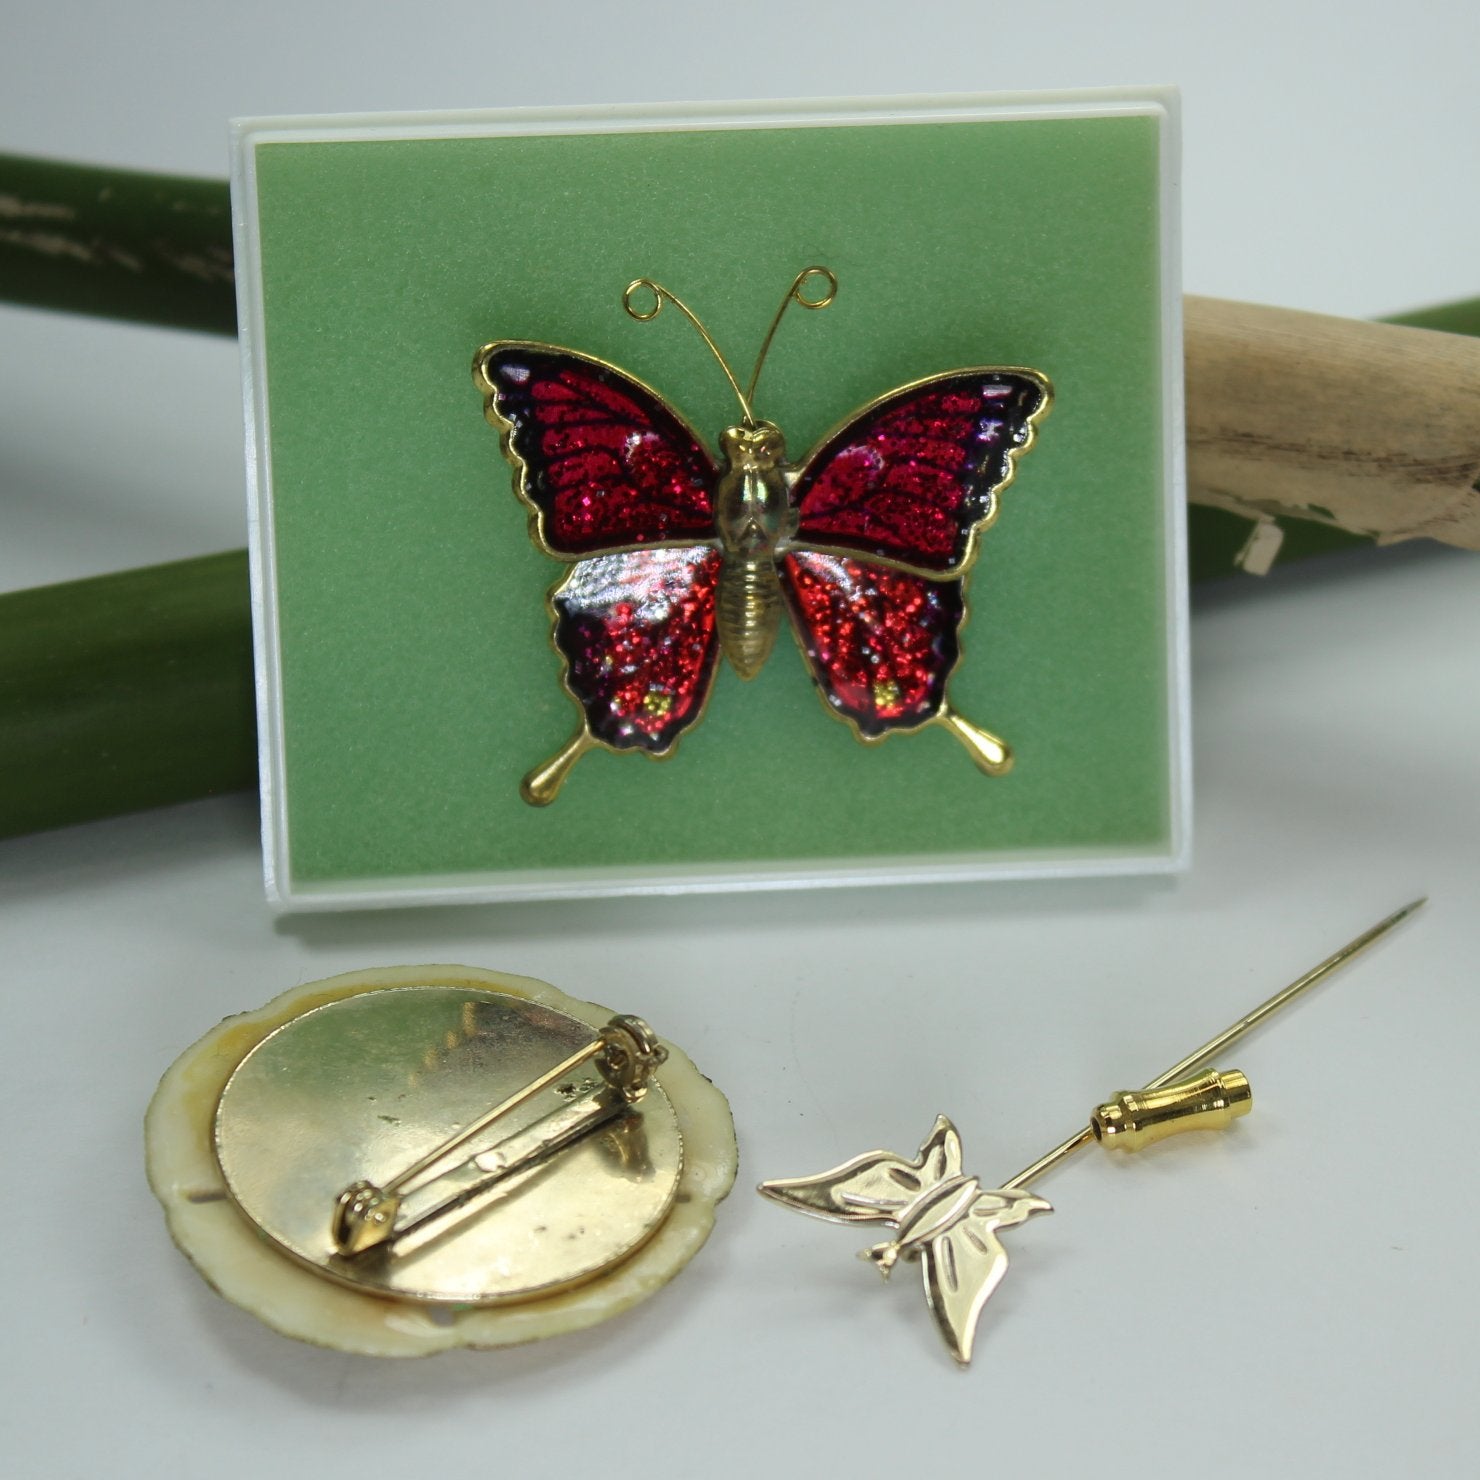 Collection 3 Butterfly Jewelry Sand Dollar Pin Sparkling Red Tie Stickpin reverse view of jewelry